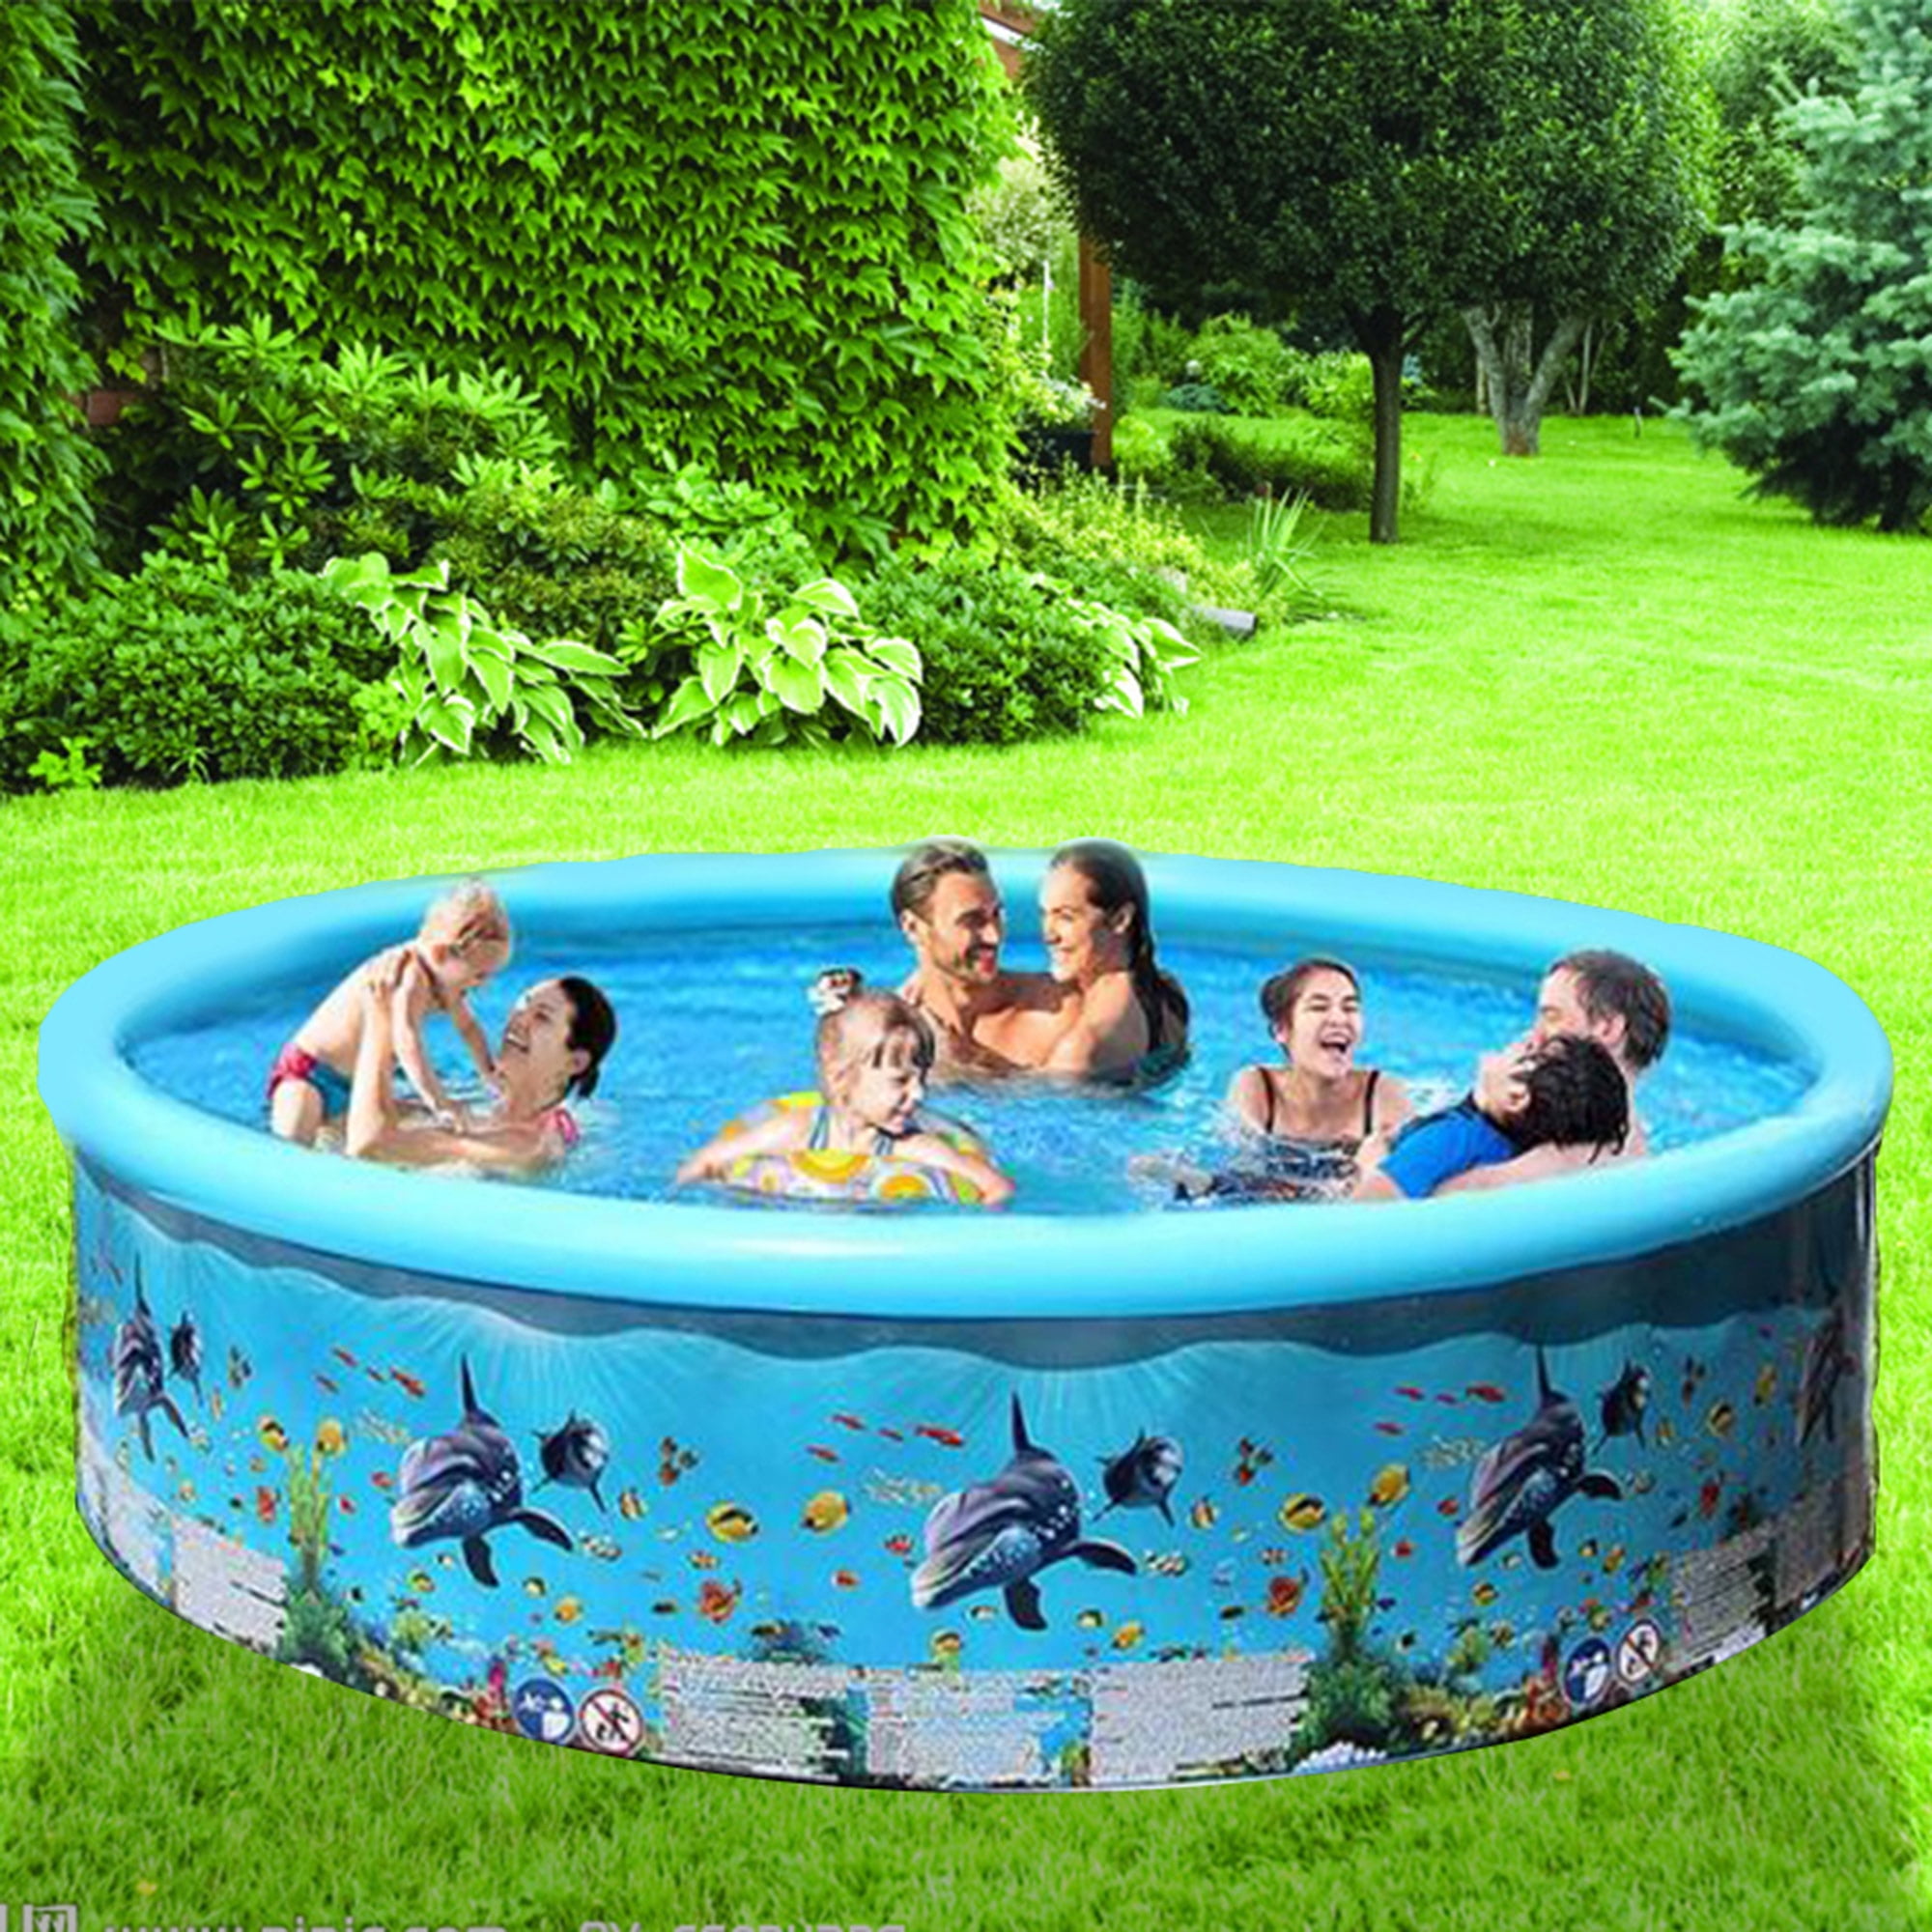 Inflatable Pools for Kids Outdoor 60x42x20in Inflatable Swimming Pools Backyard Toddlers Adults Babies Blue Swim Center for Kids Garden Family Swimming Pool